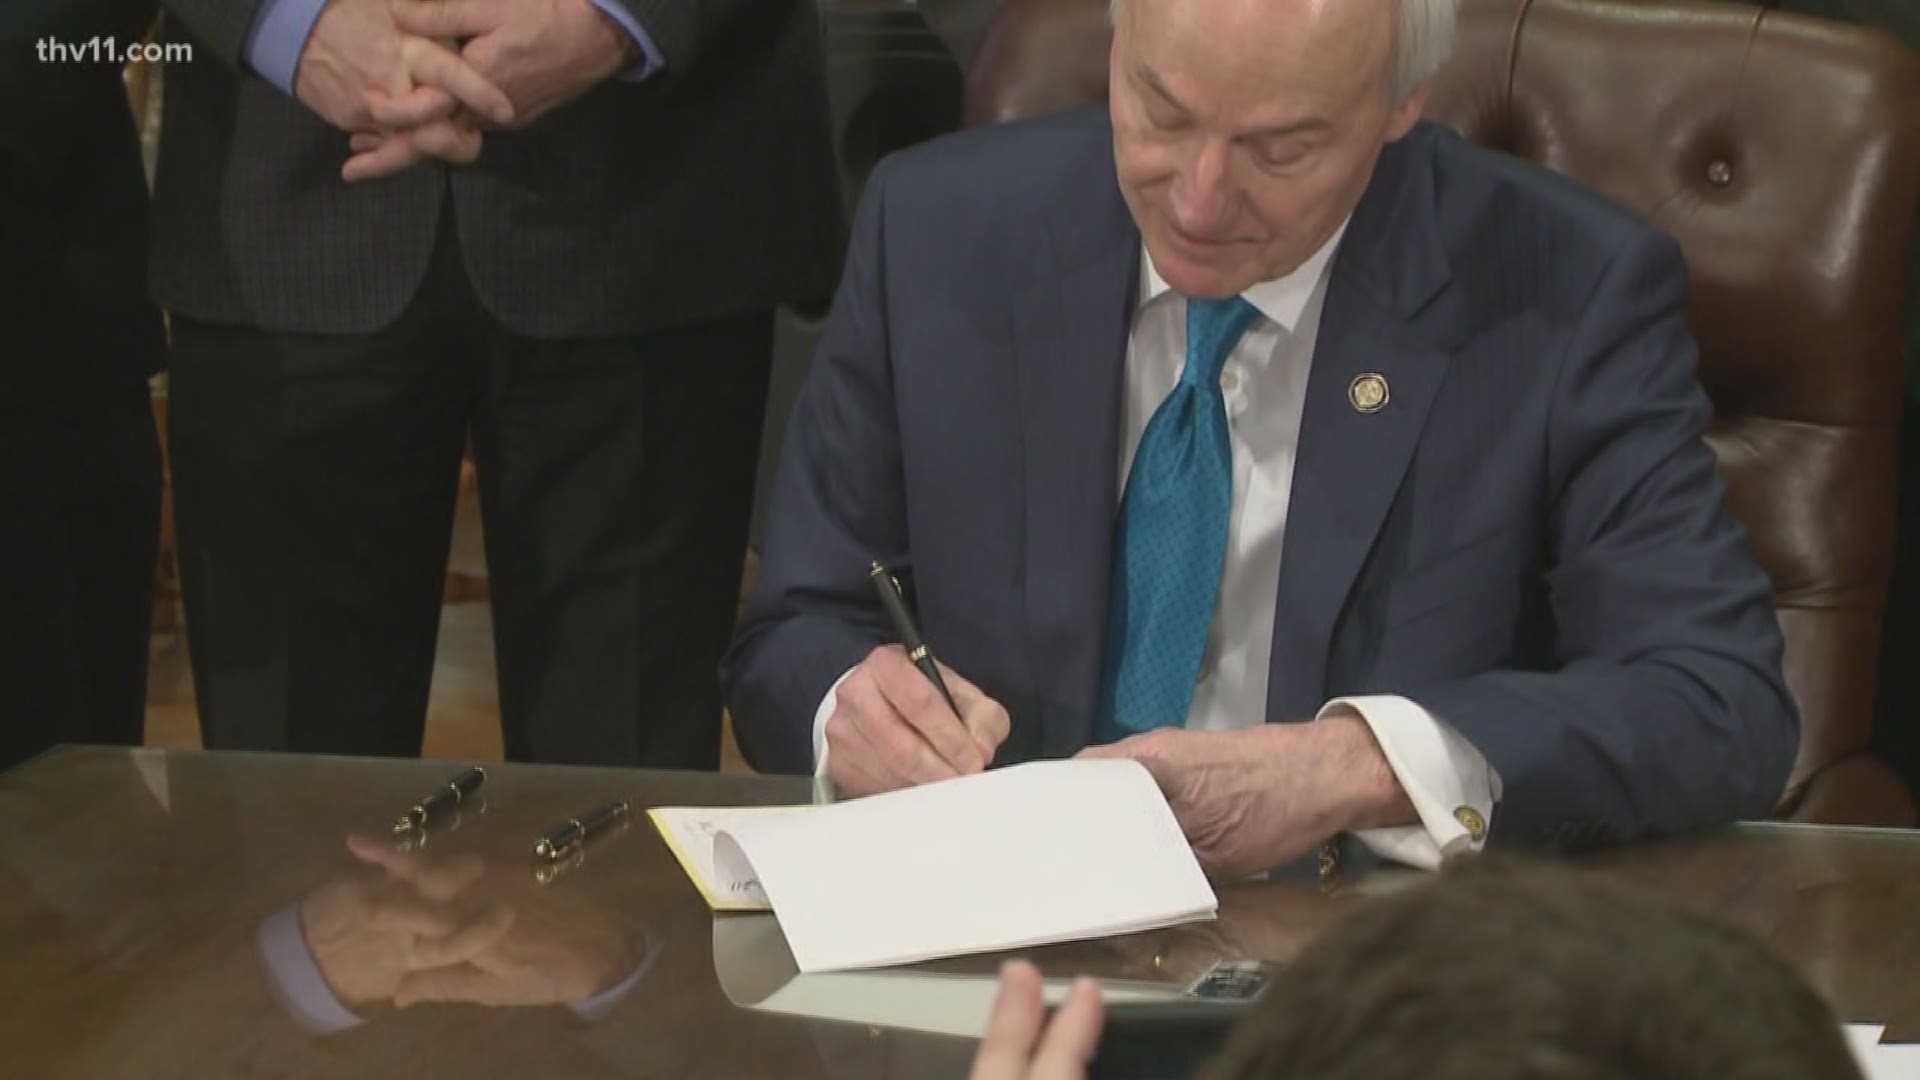 Gov. Asa Hutchinson signed his $97 million dollar tax plan into law today, which will impose tax cuts to the state's top earners over the next two years.